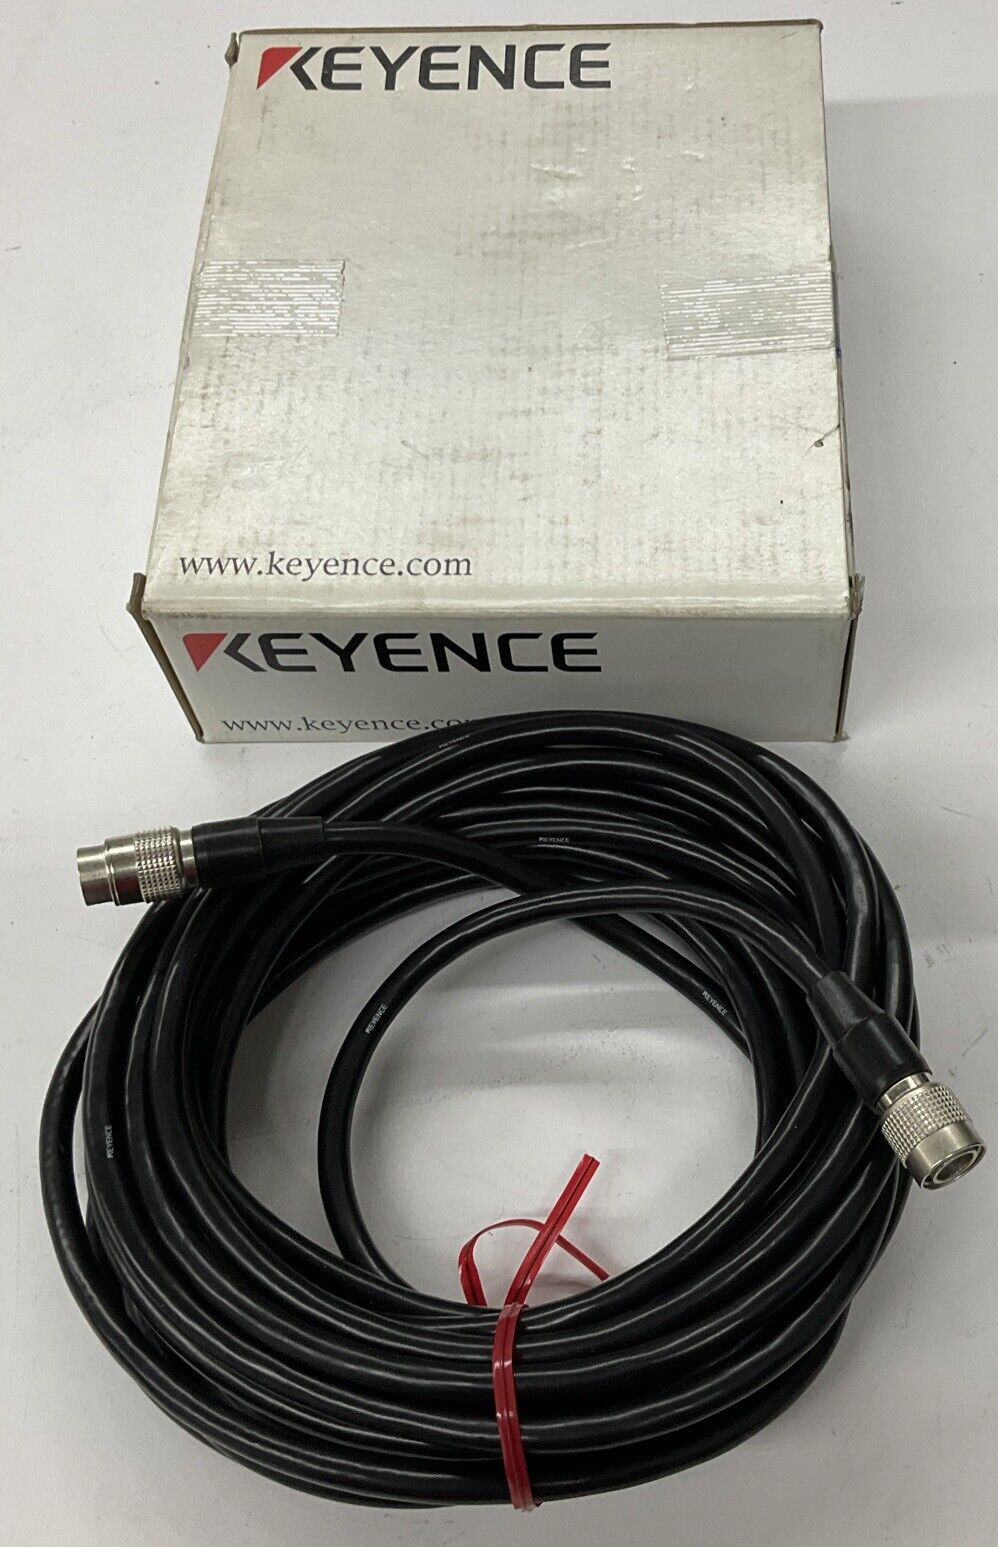 Keyence VG-C7R 12-Pin Cable / Cordset (RE185) - 0